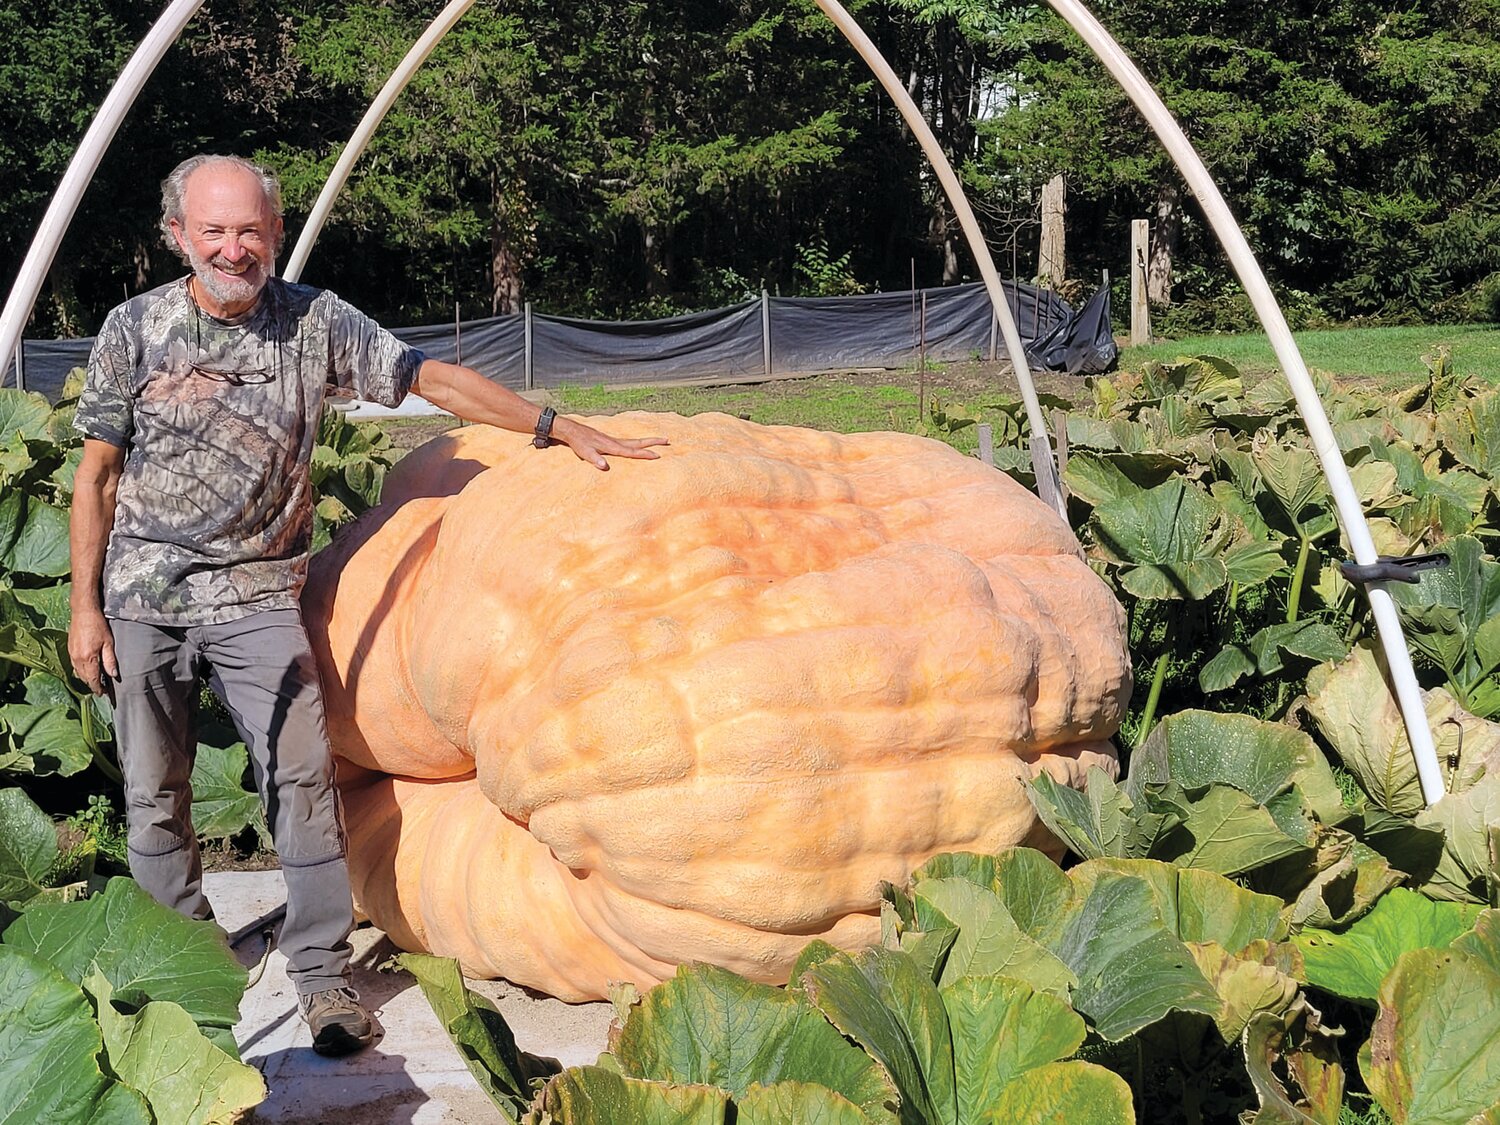 LA ULTIMA PEPO: Steve Sperry had one more monster to harvest. “The big one, I hope,” he said earlier this week. The final harvest and weigh-in is planned for this weekend. Only then will he know where his giant pumpkin-growing skills rank in the world.